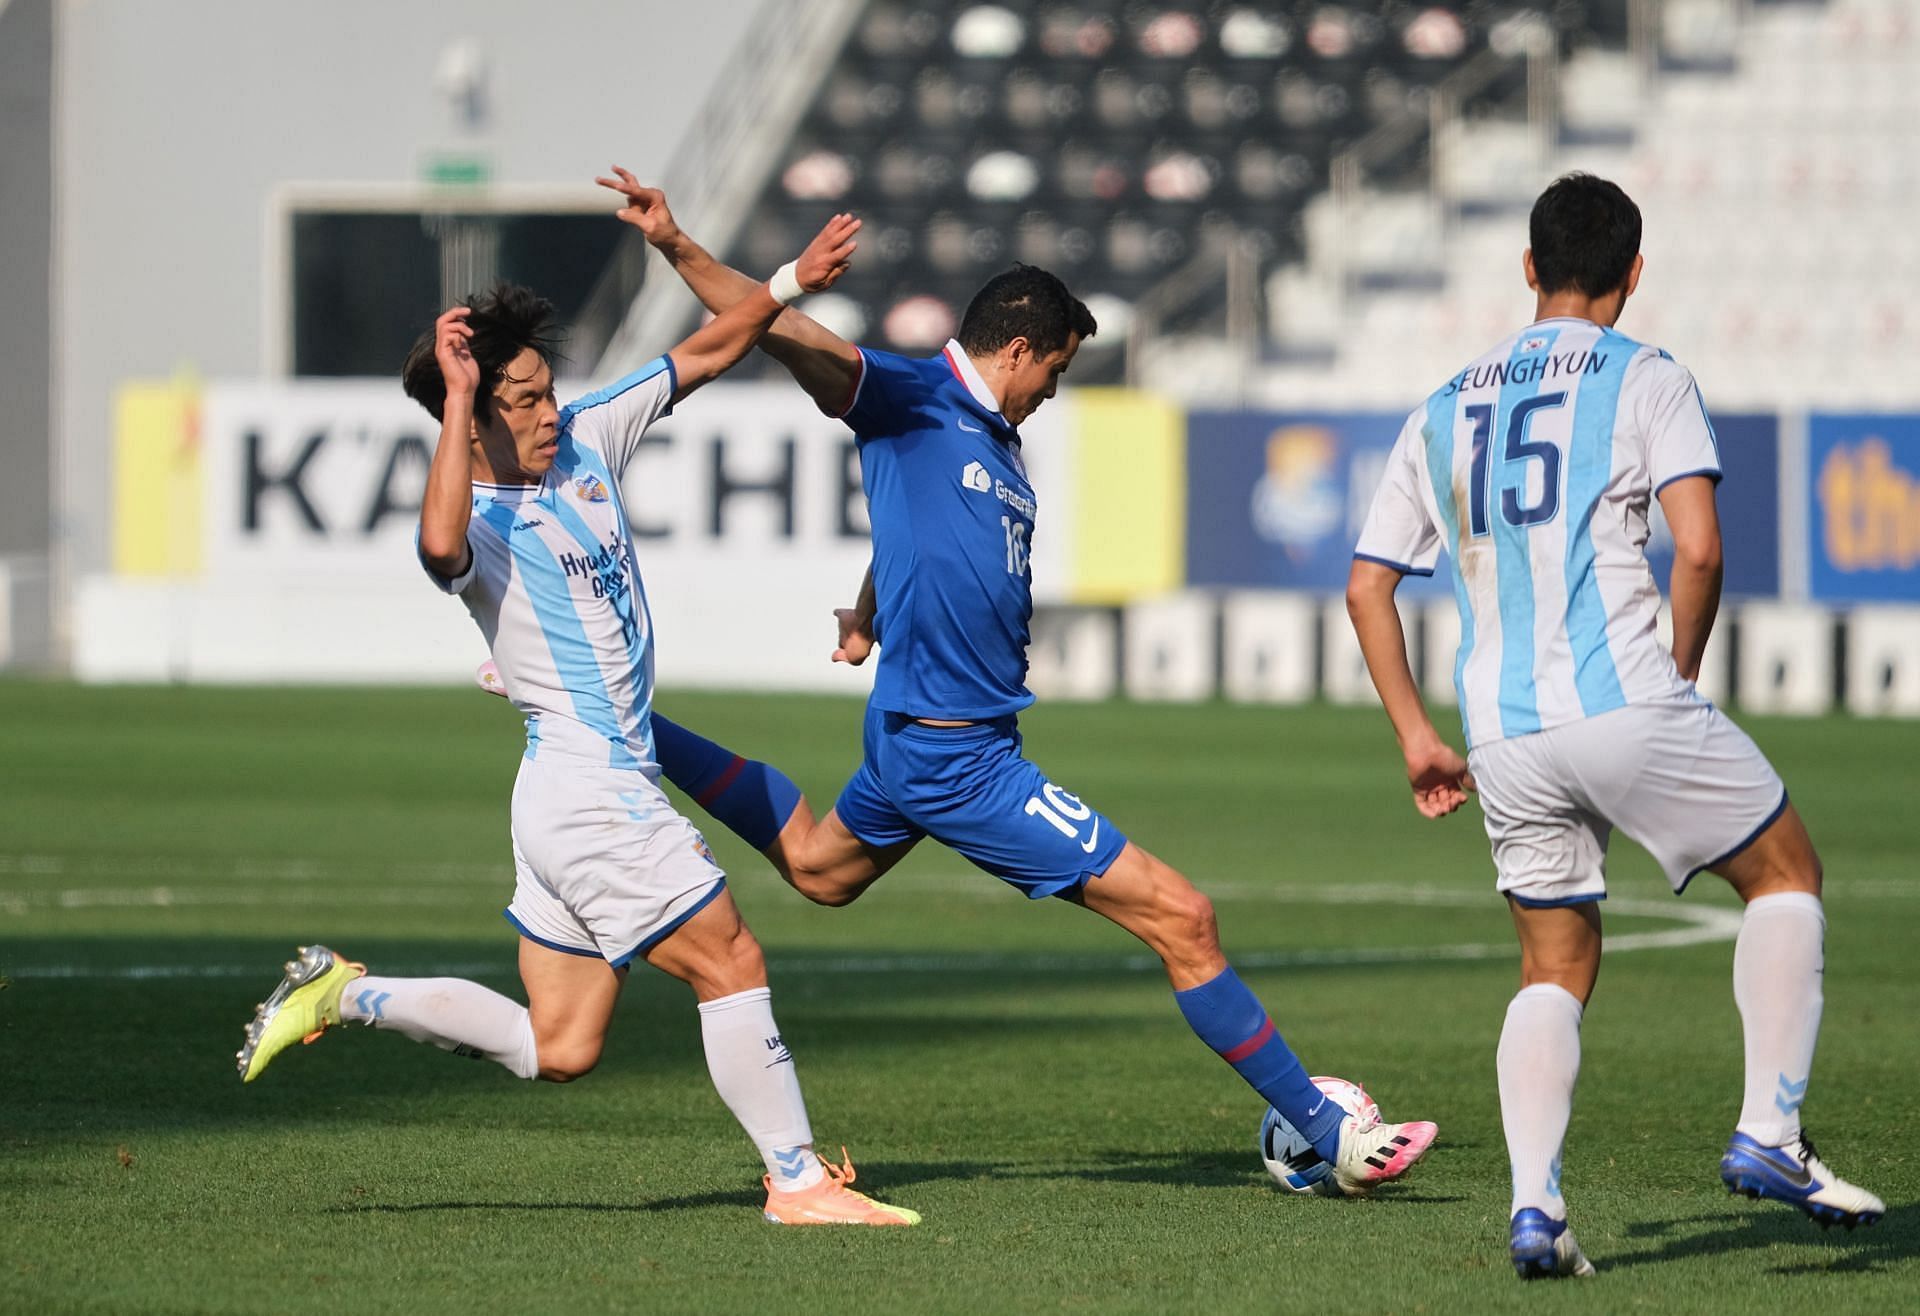 Wuhan Three Towns will square off against Shanghai Shenhua on Sunday.